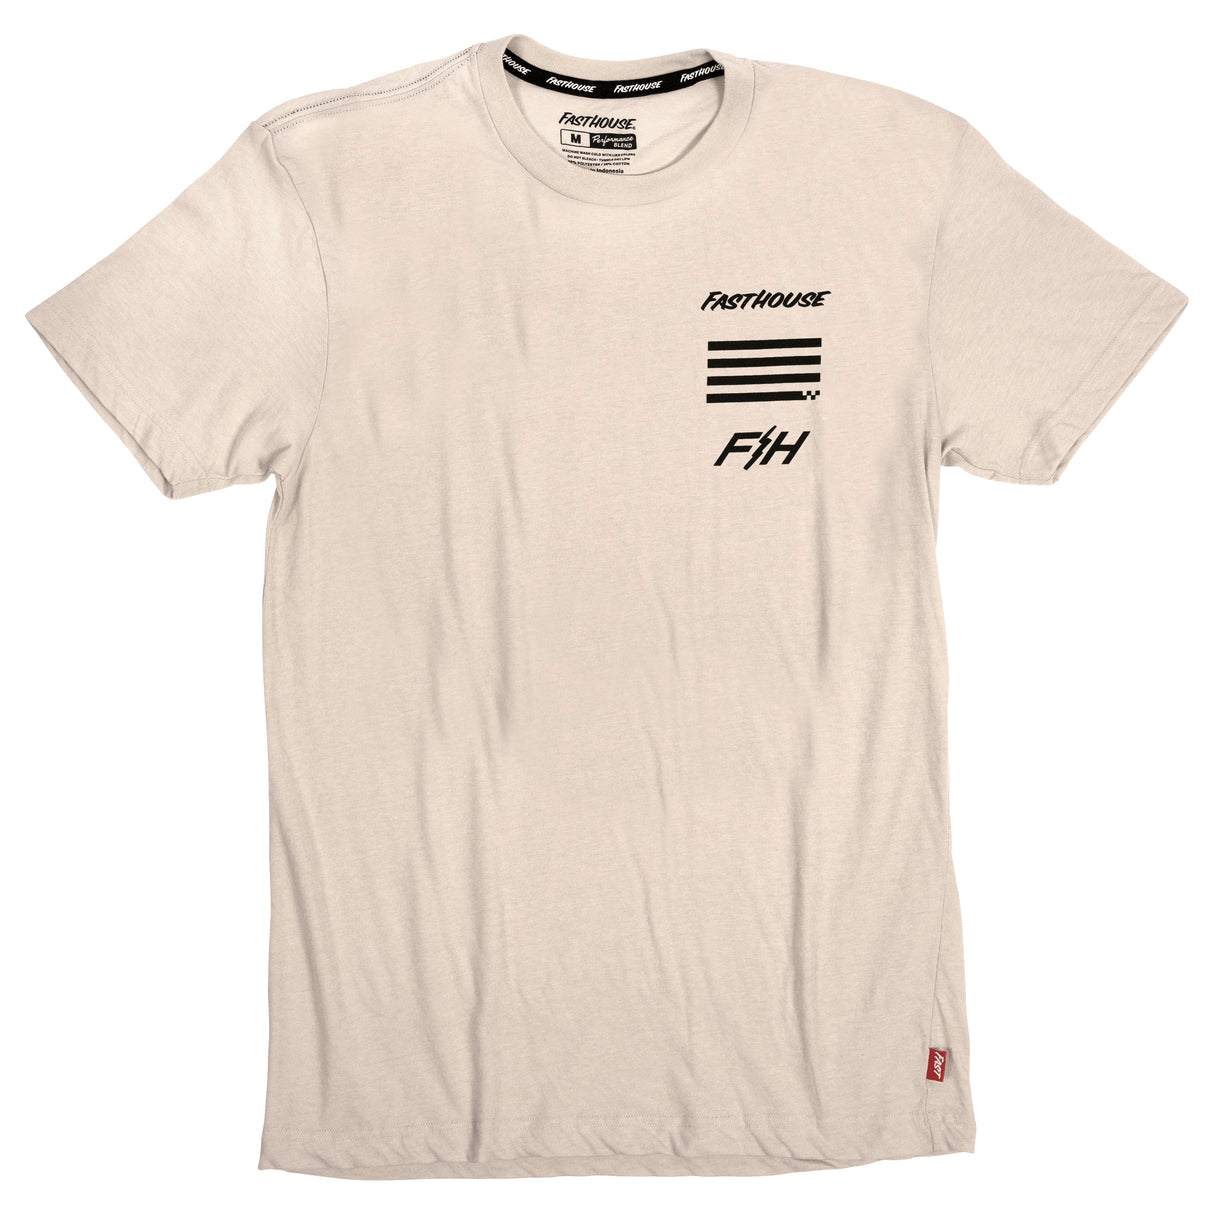 Fasthouse Trace Short Sleeve Tech Tee